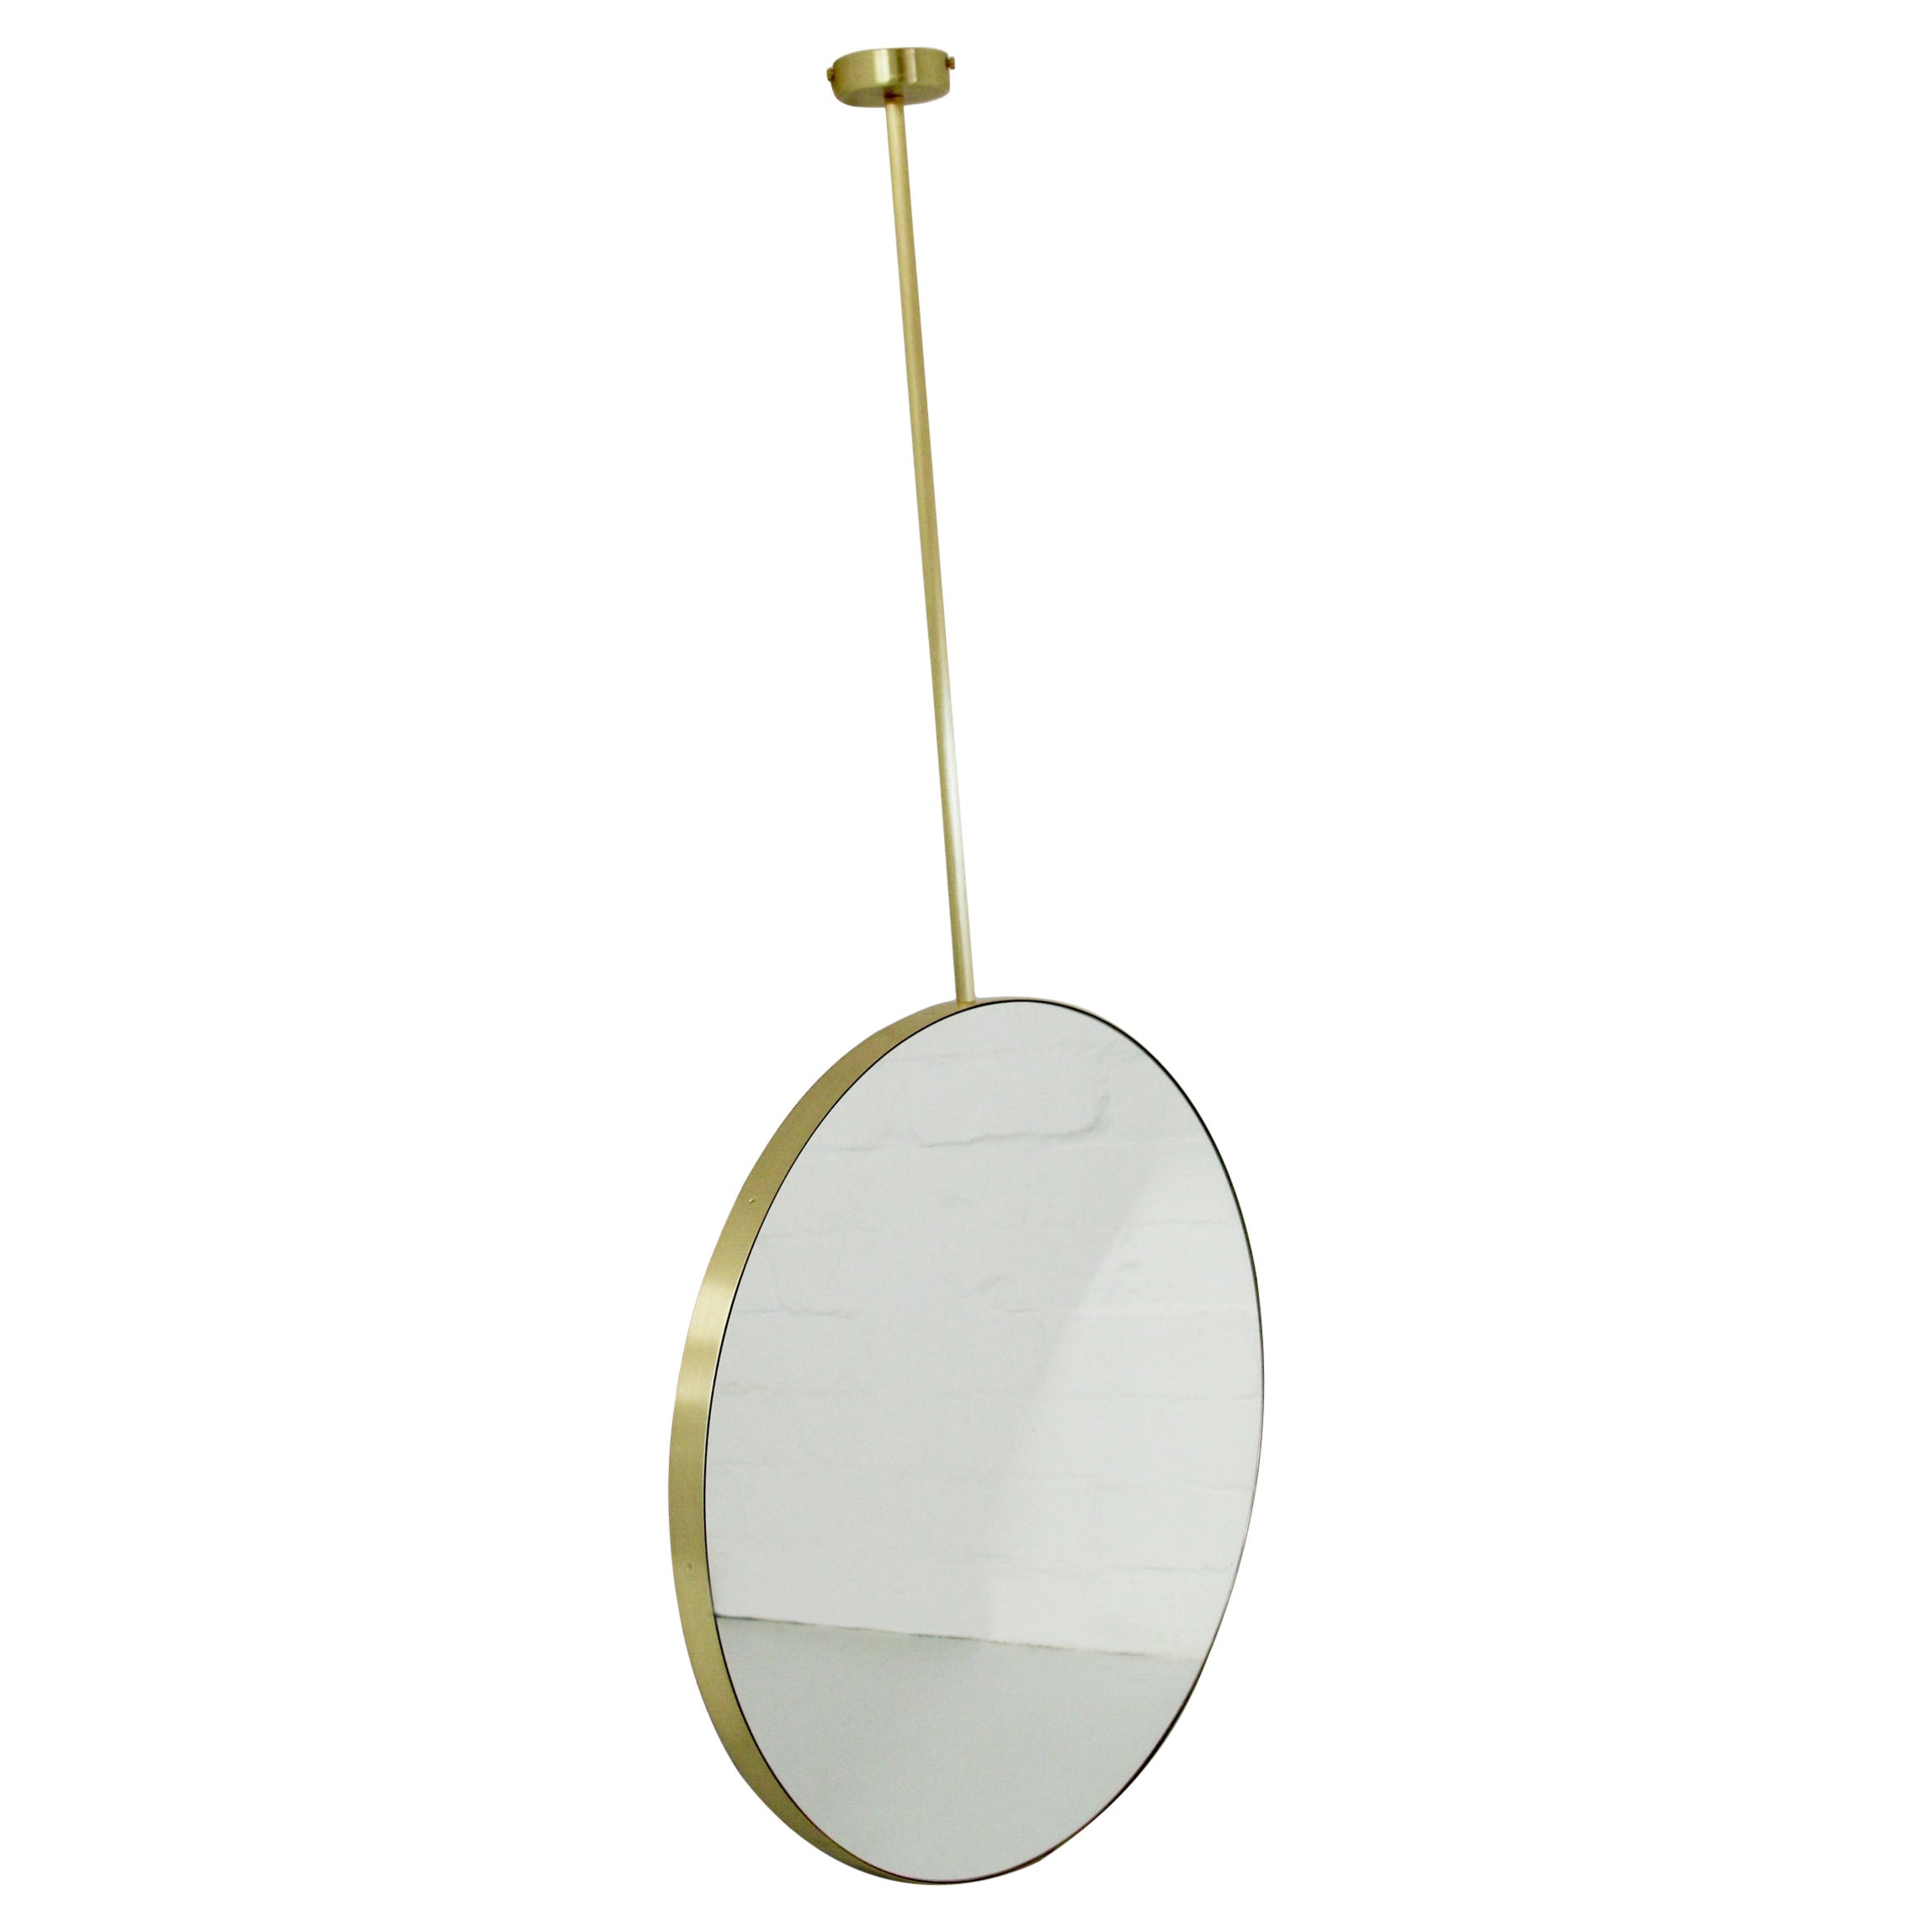 Orbis Suspended Round Mirror with a Brushed Brass Frame, Customisable